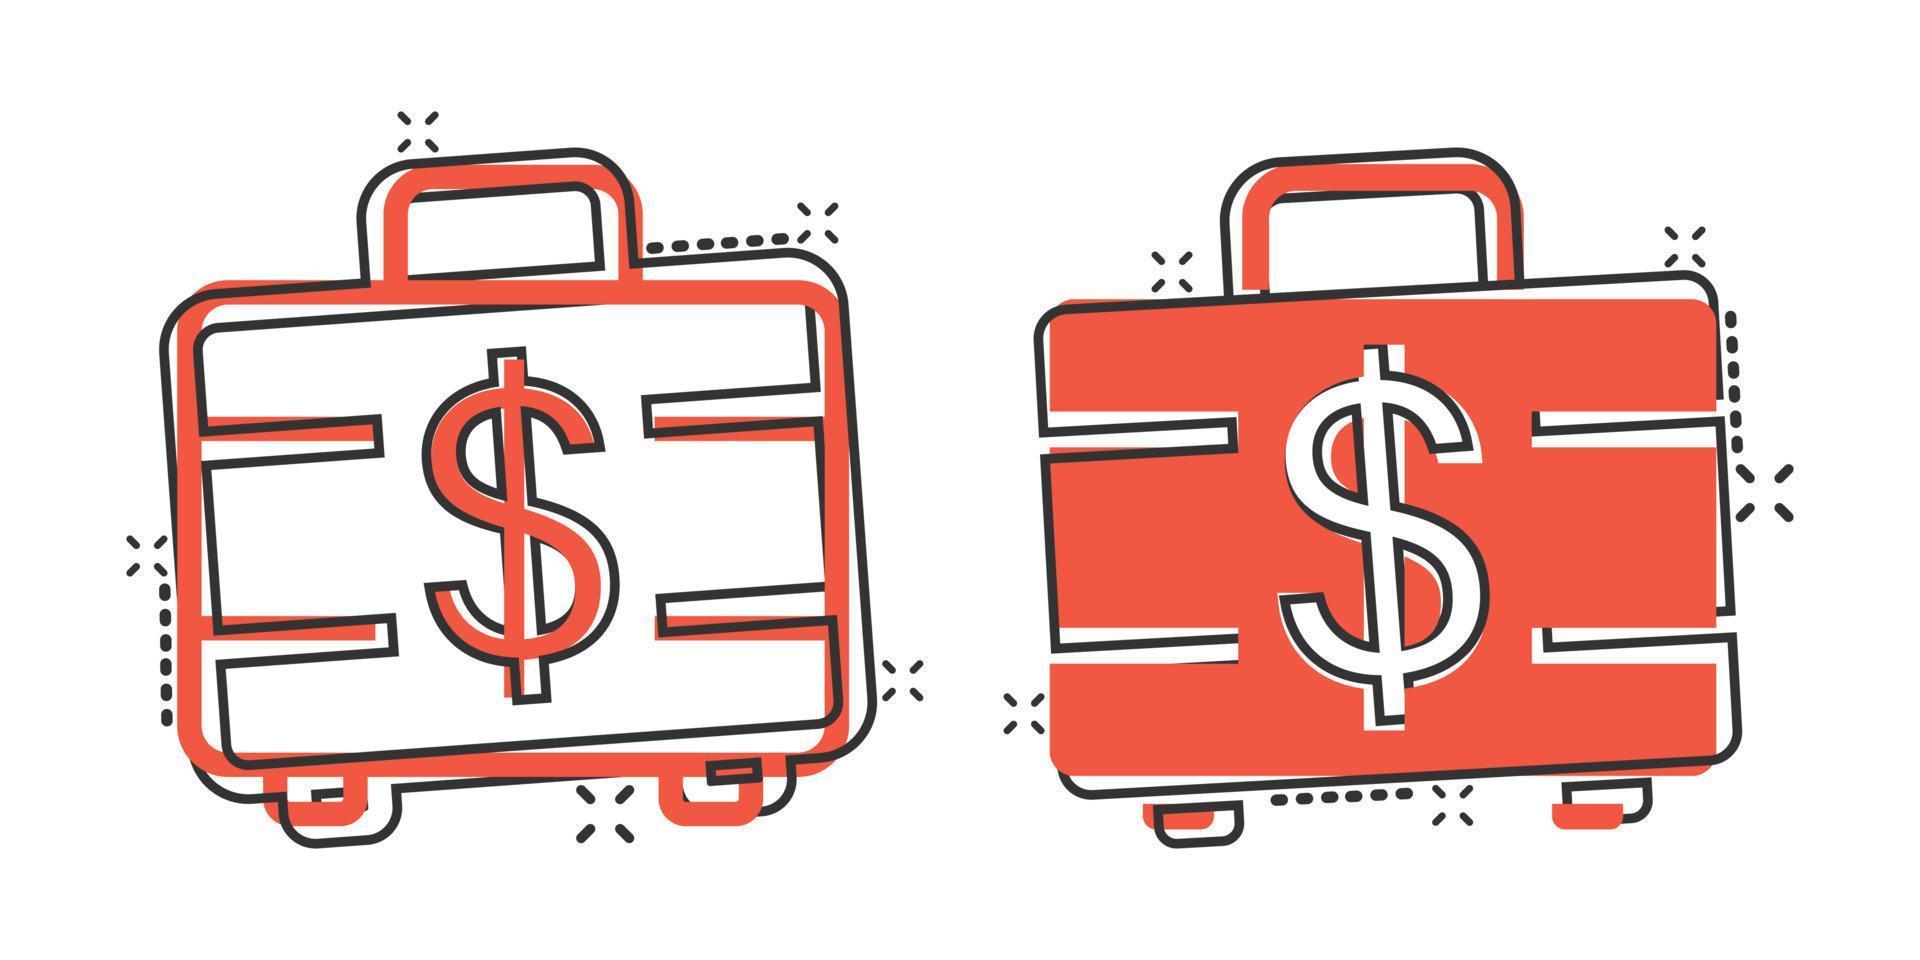 Money briefcase icon in comic style. Cash box cartoon vector illustration on white isolated background. Finance splash effect business concept.